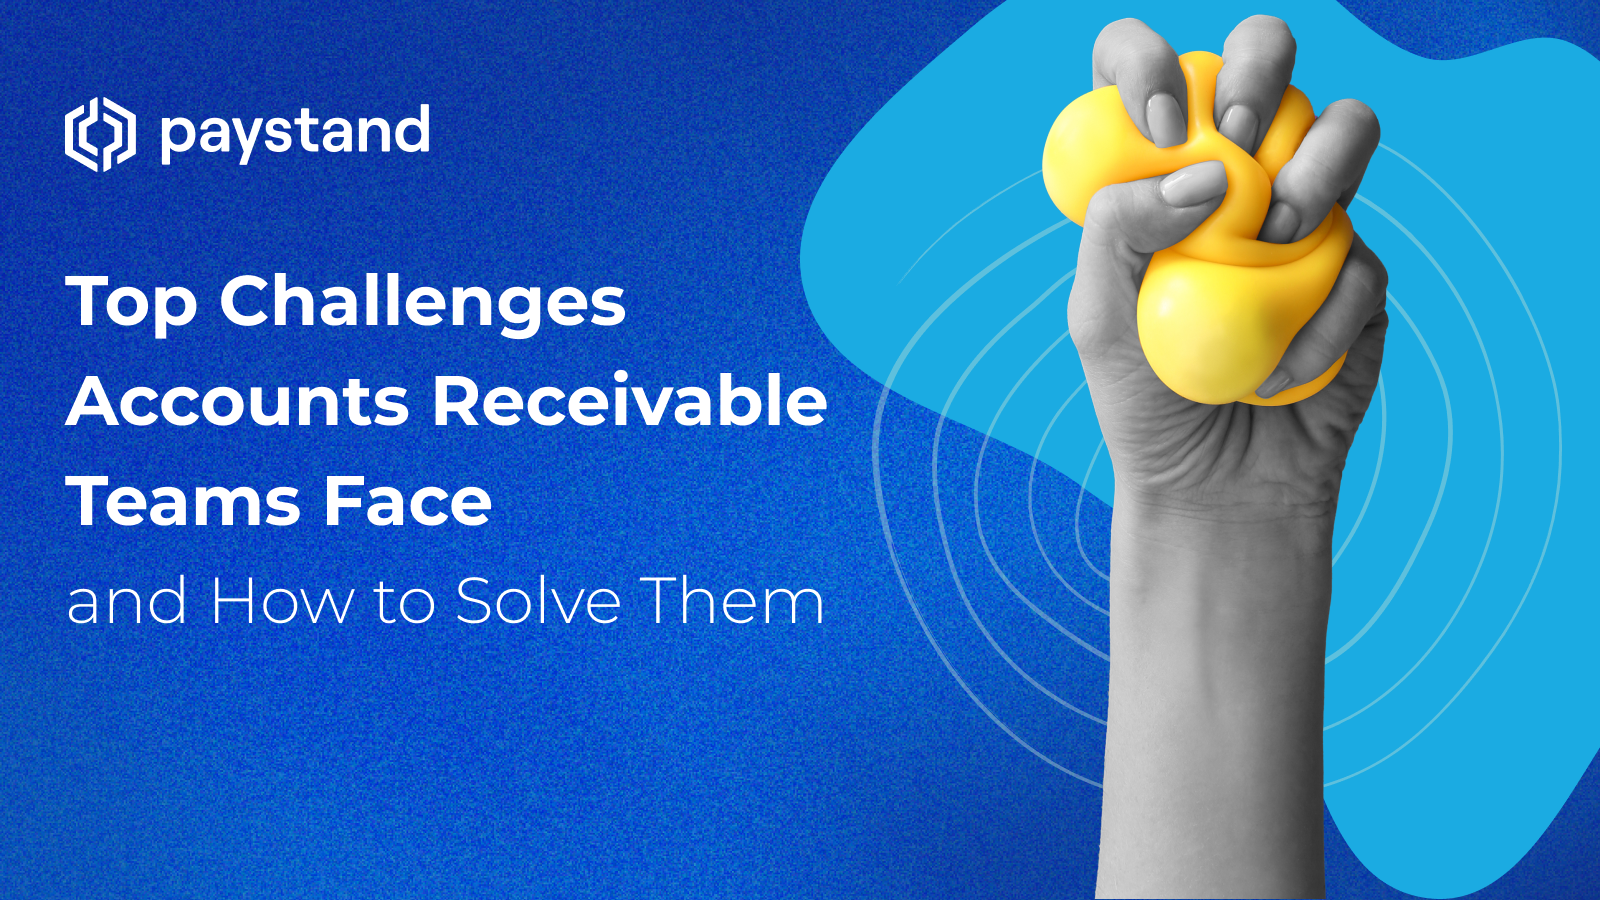 Top Challenges Accounts Receivable Teams Face and How to Solve Them